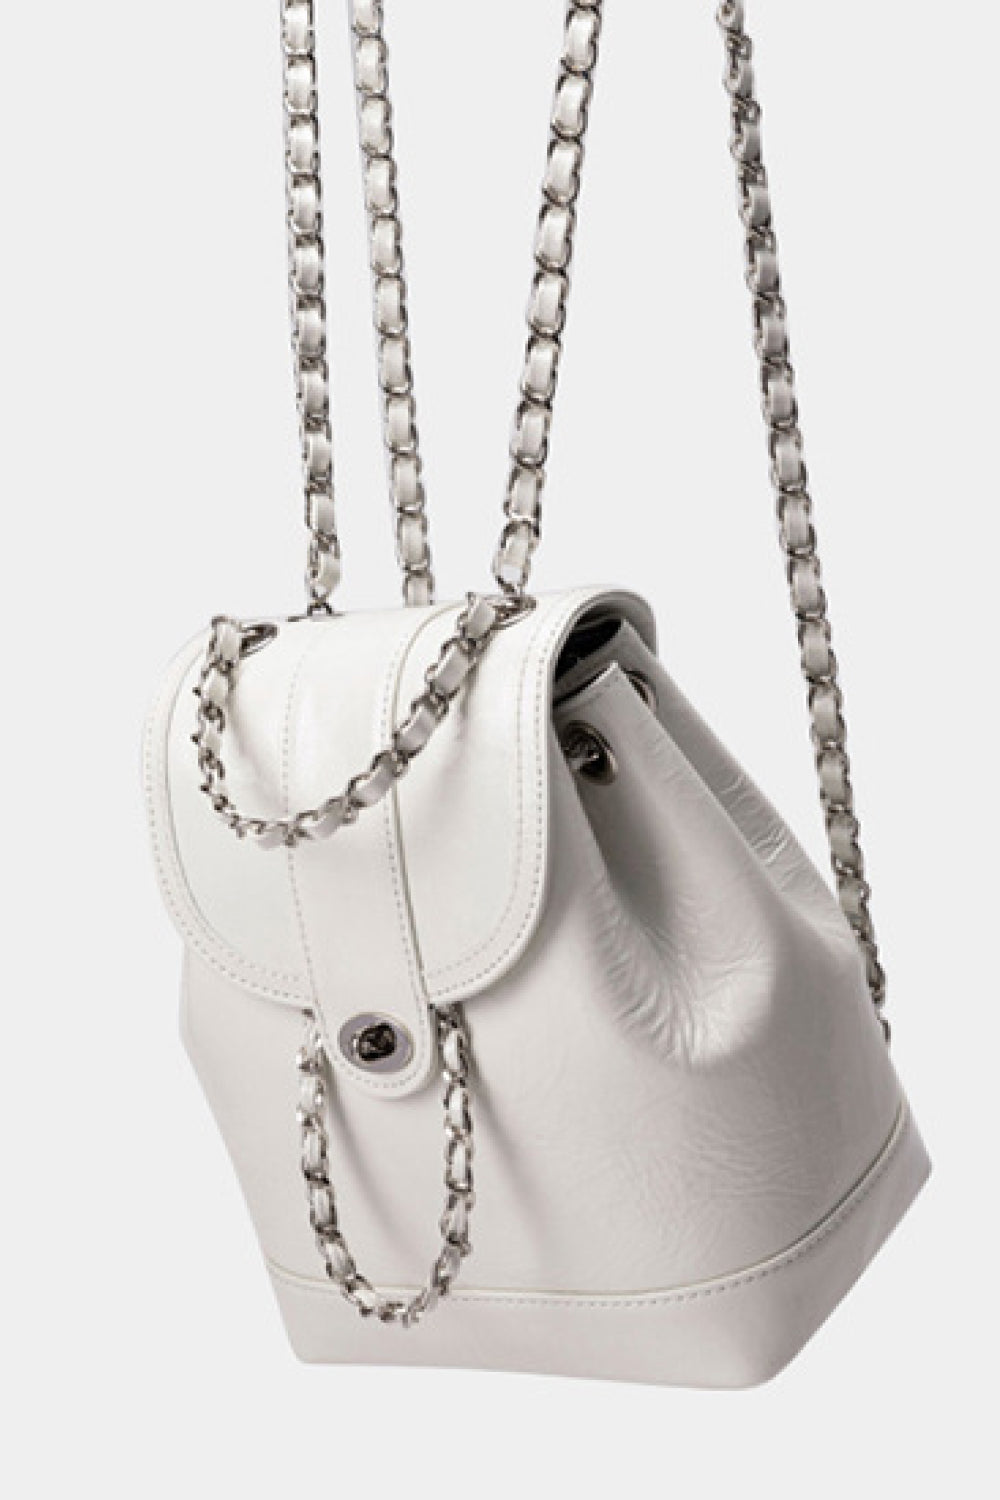 CREAM ONE SIZE Chain Link PU Leather Backpack - 3 colors - backpack at TFC&H Co.